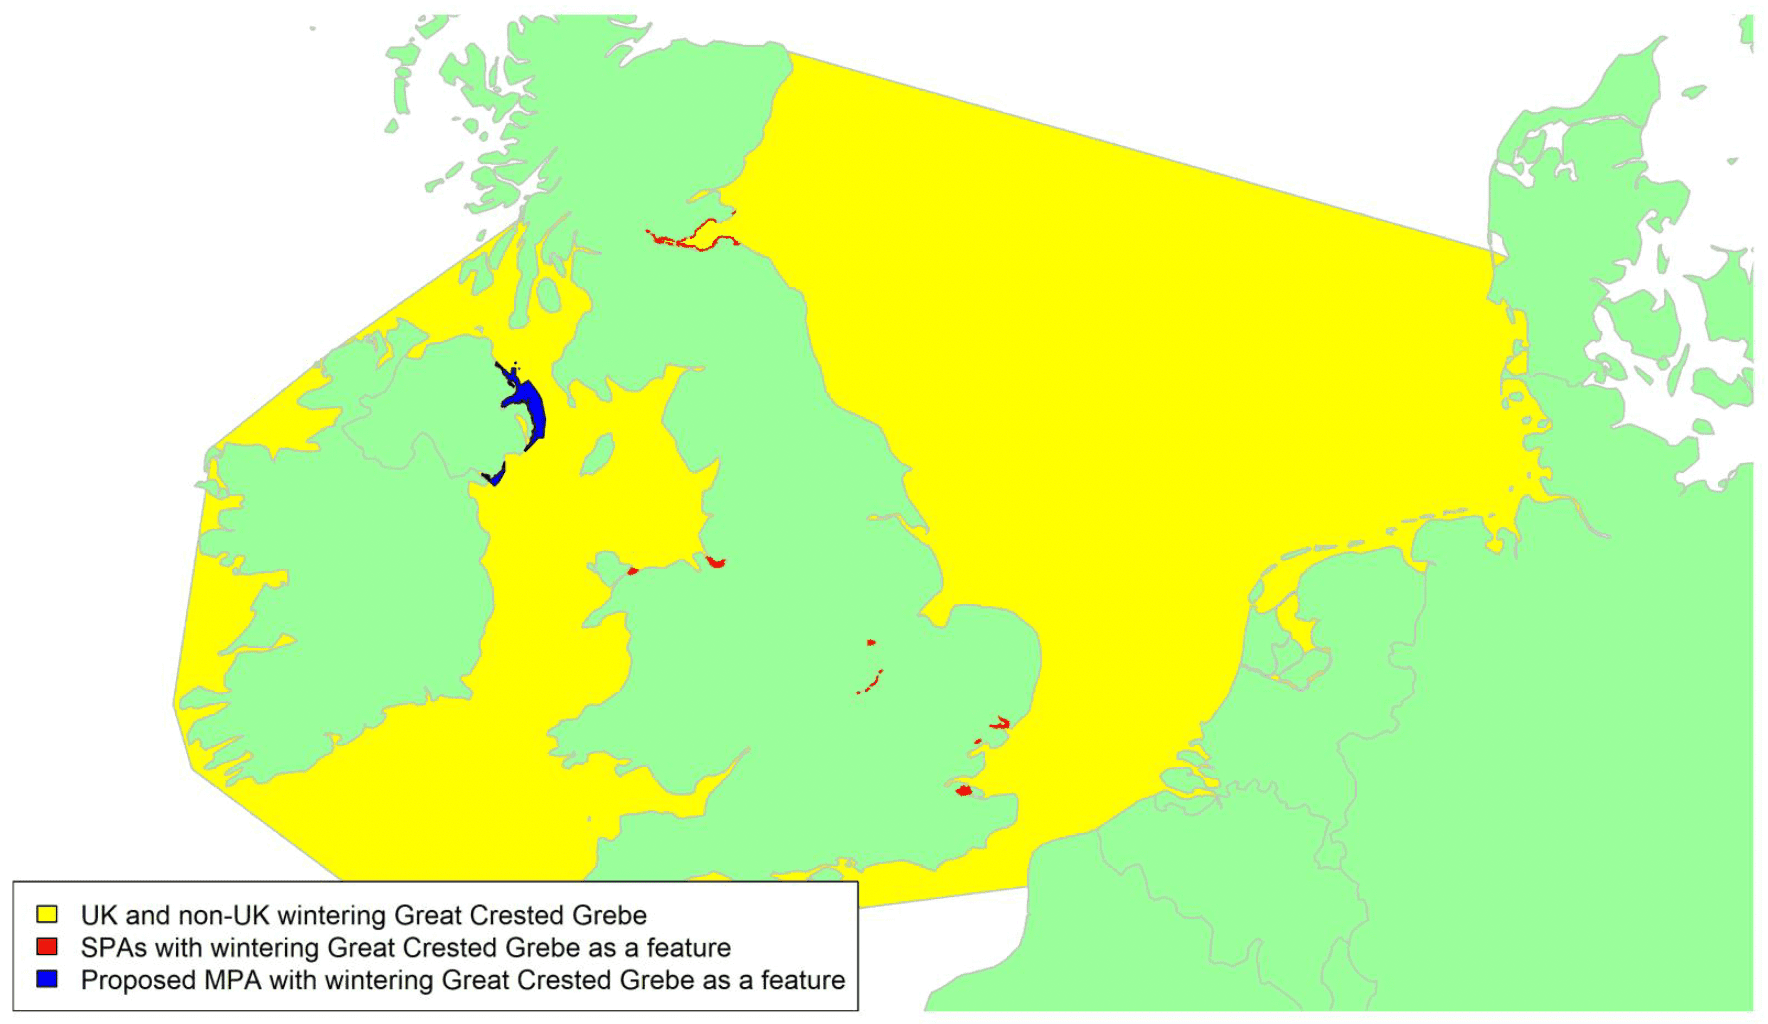 Map of North West Europe showing migratory routes and SPAs within the UK for Great Crested Grebe as described in the text below.